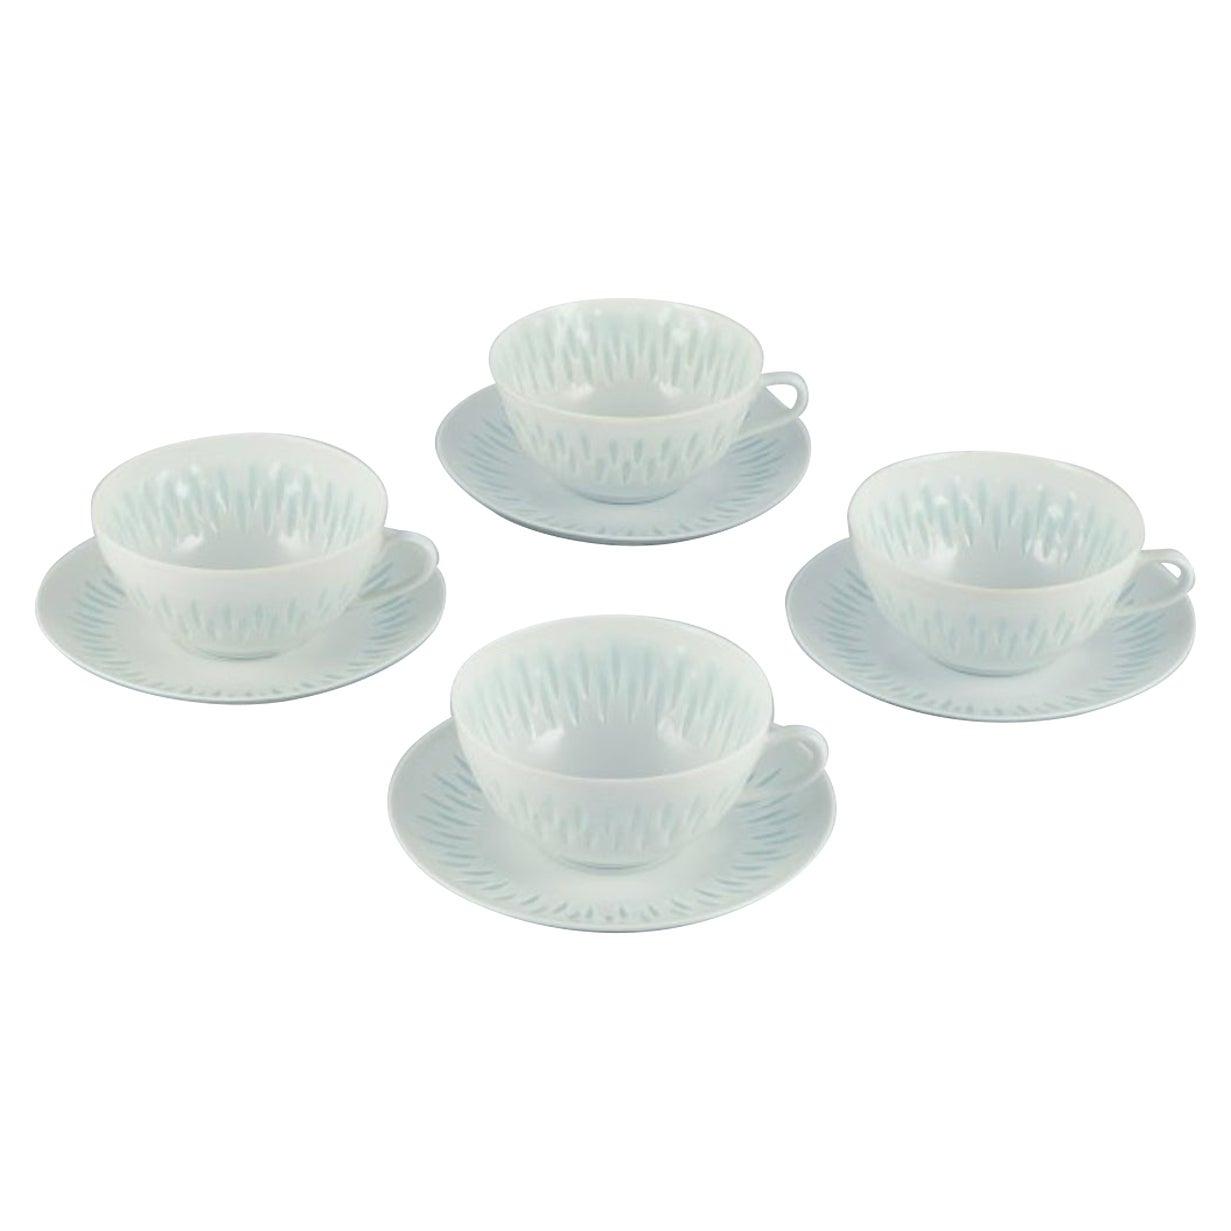 Friedl Holzer-Kjellberg for Arabia. Four pairs of tea cups with saucers